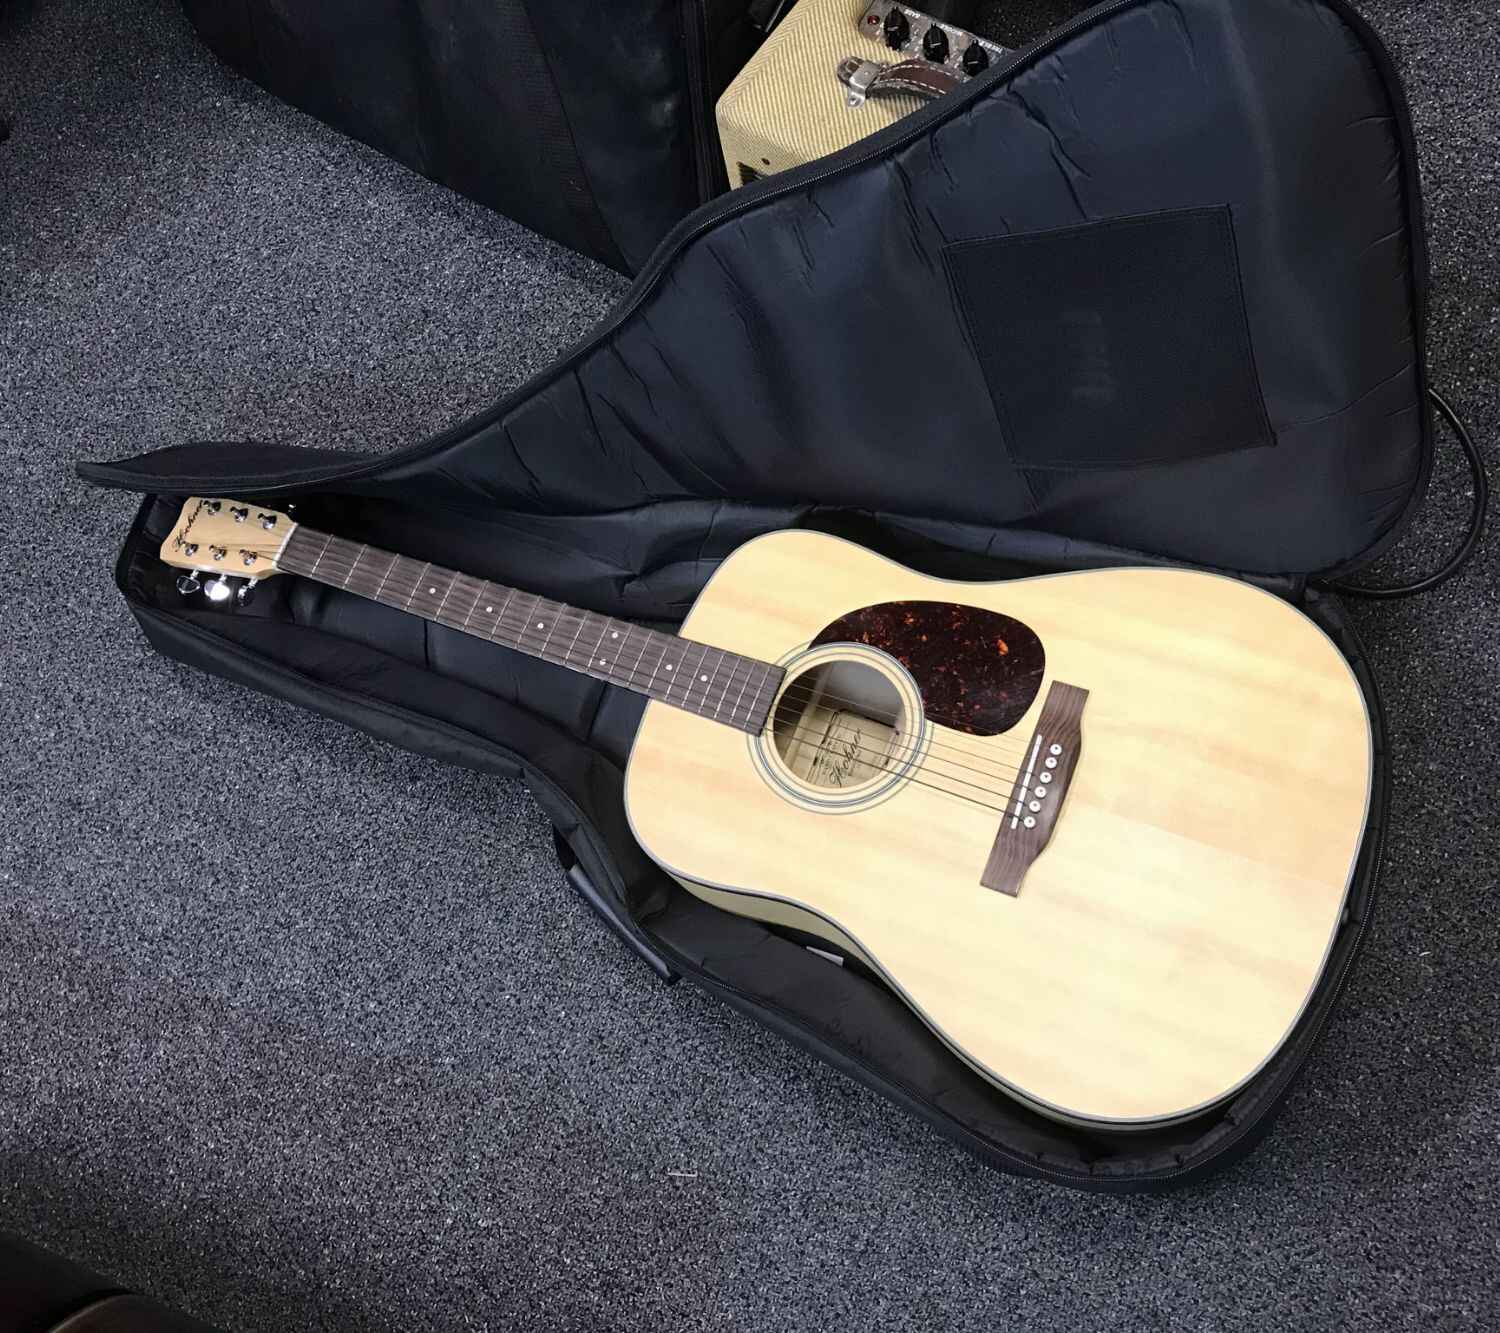 What Is A Hohner Acoustic Guitar Worth